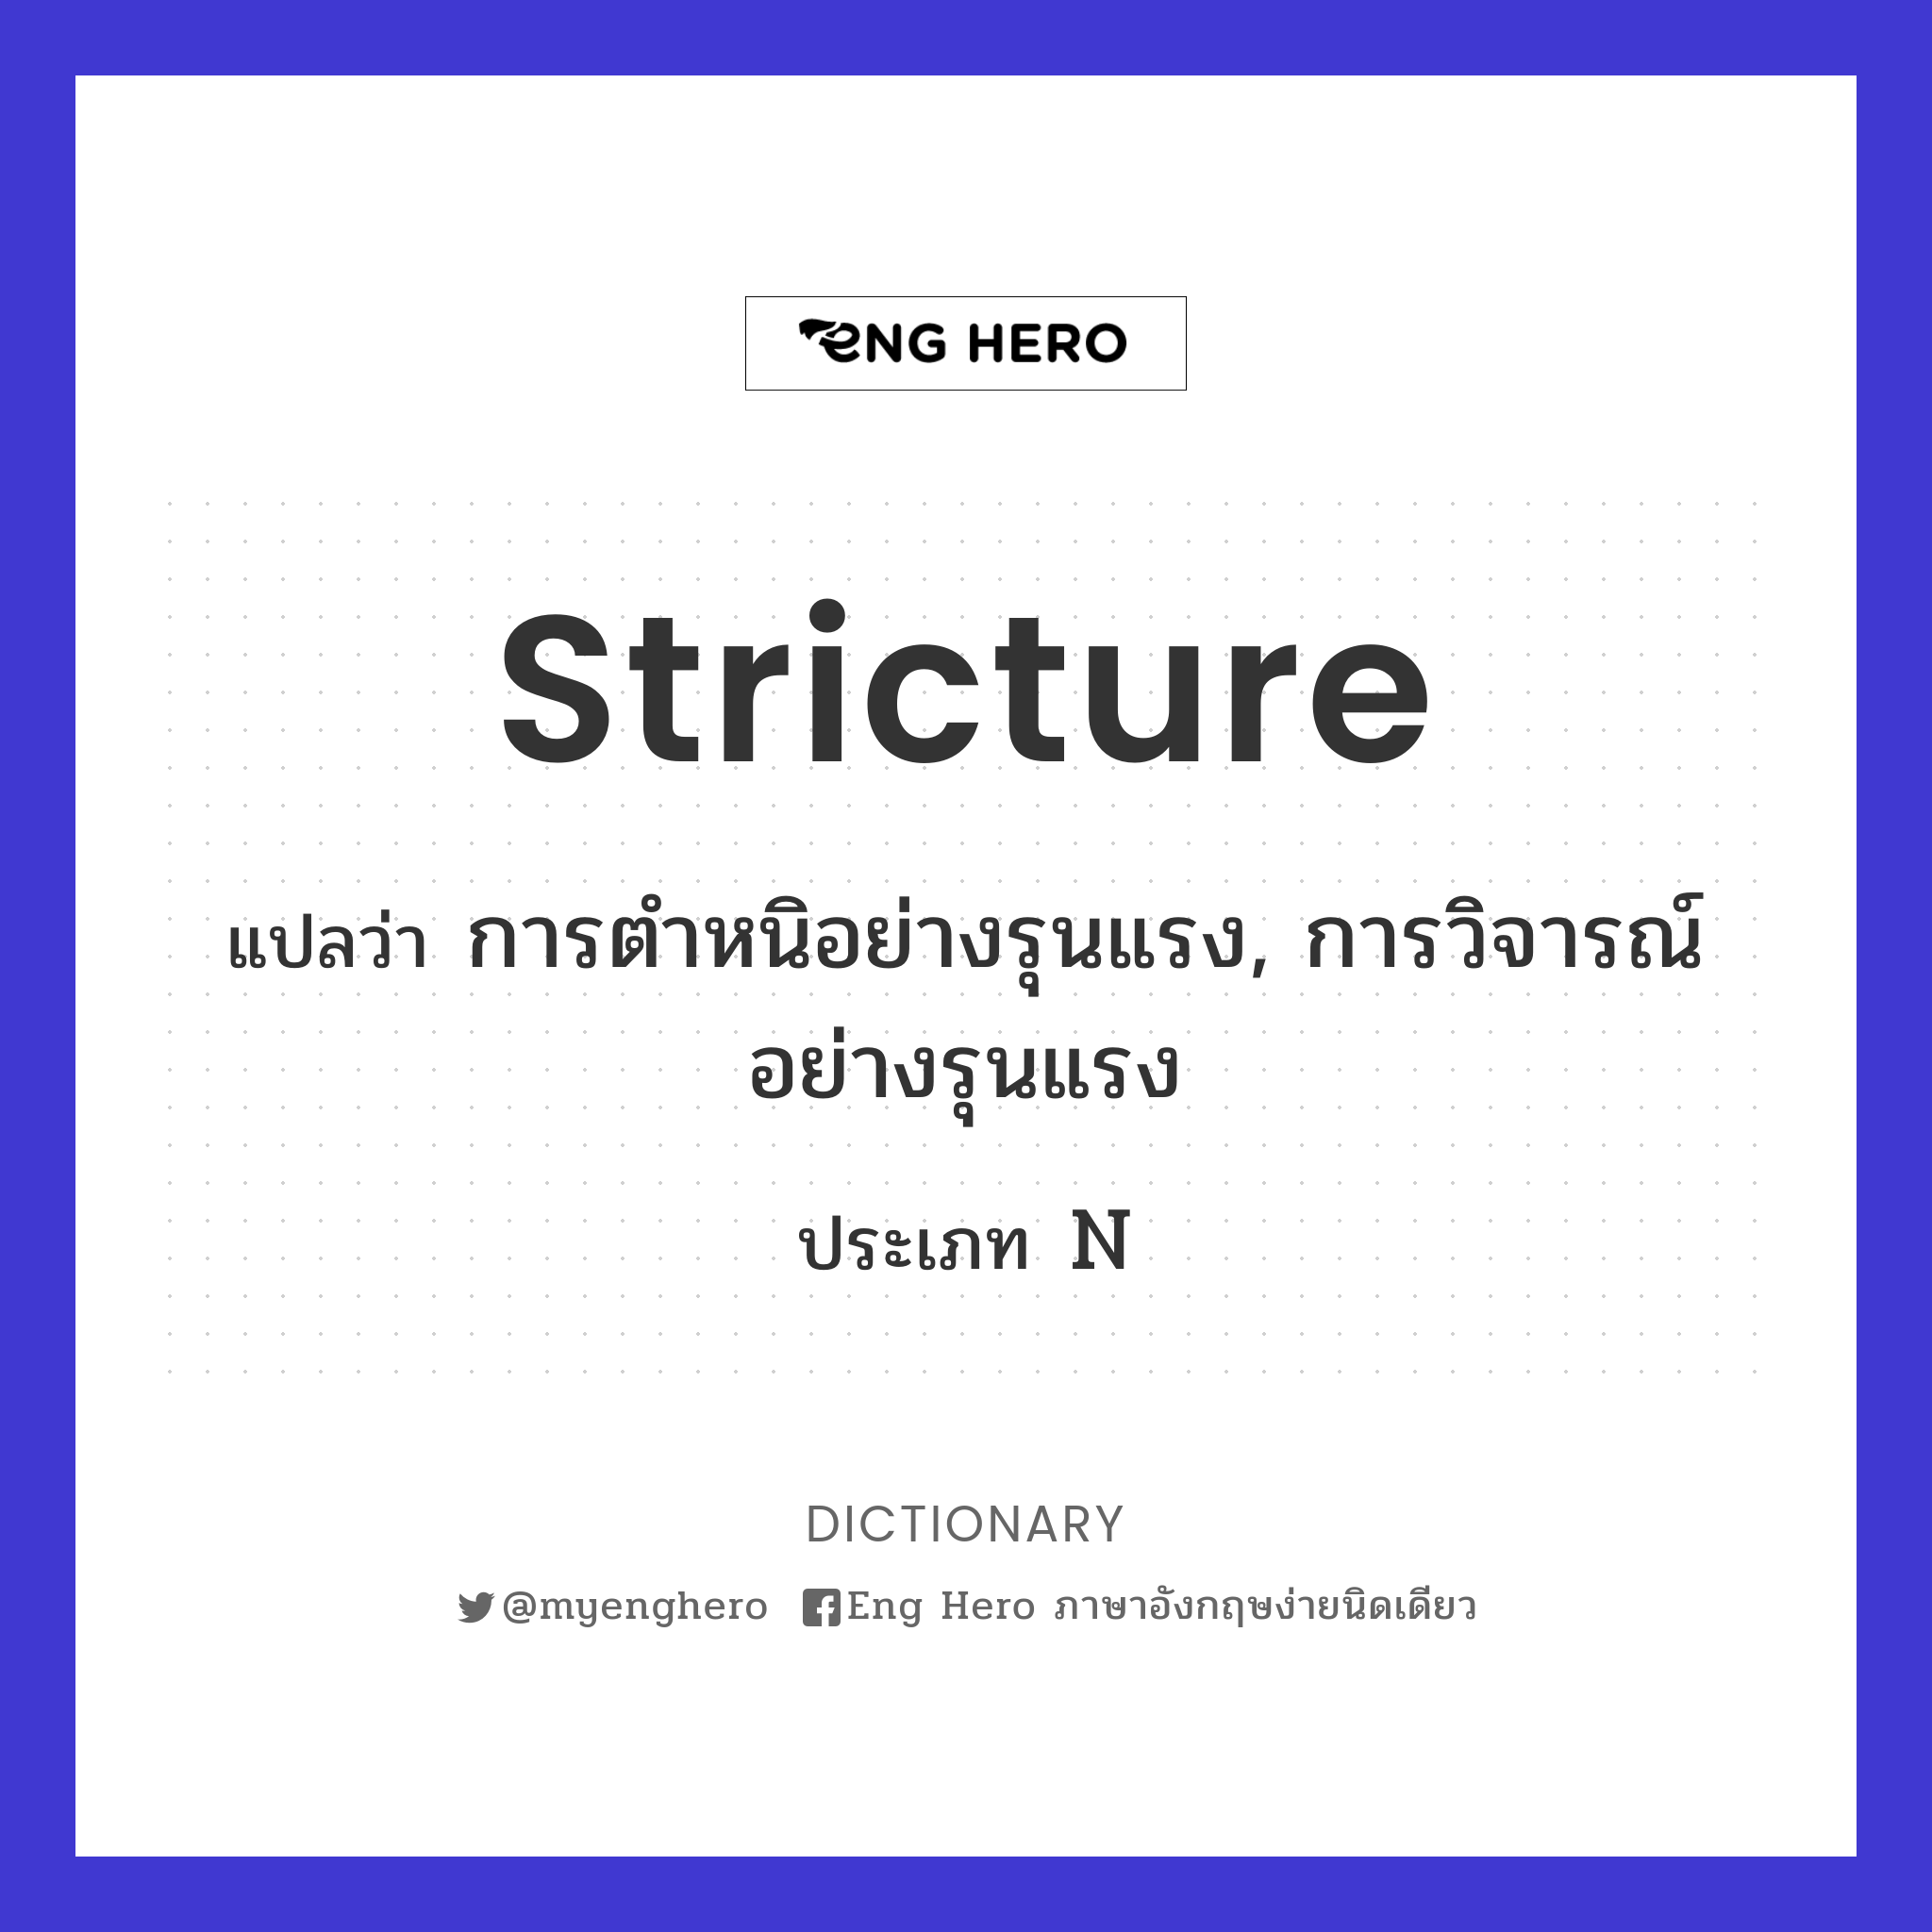 stricture